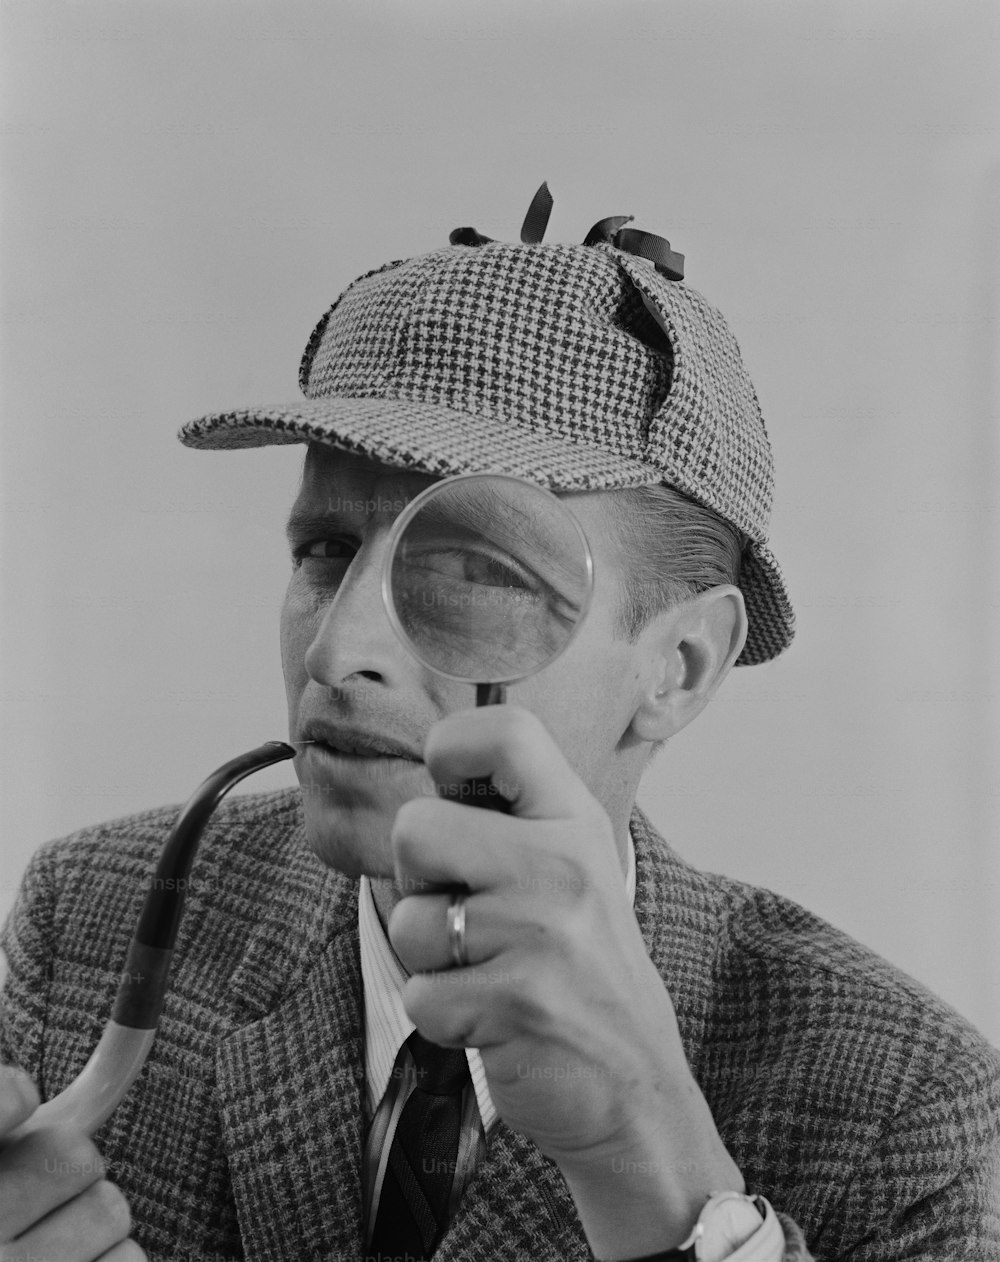 a man wearing a hat and holding a magnifying glass